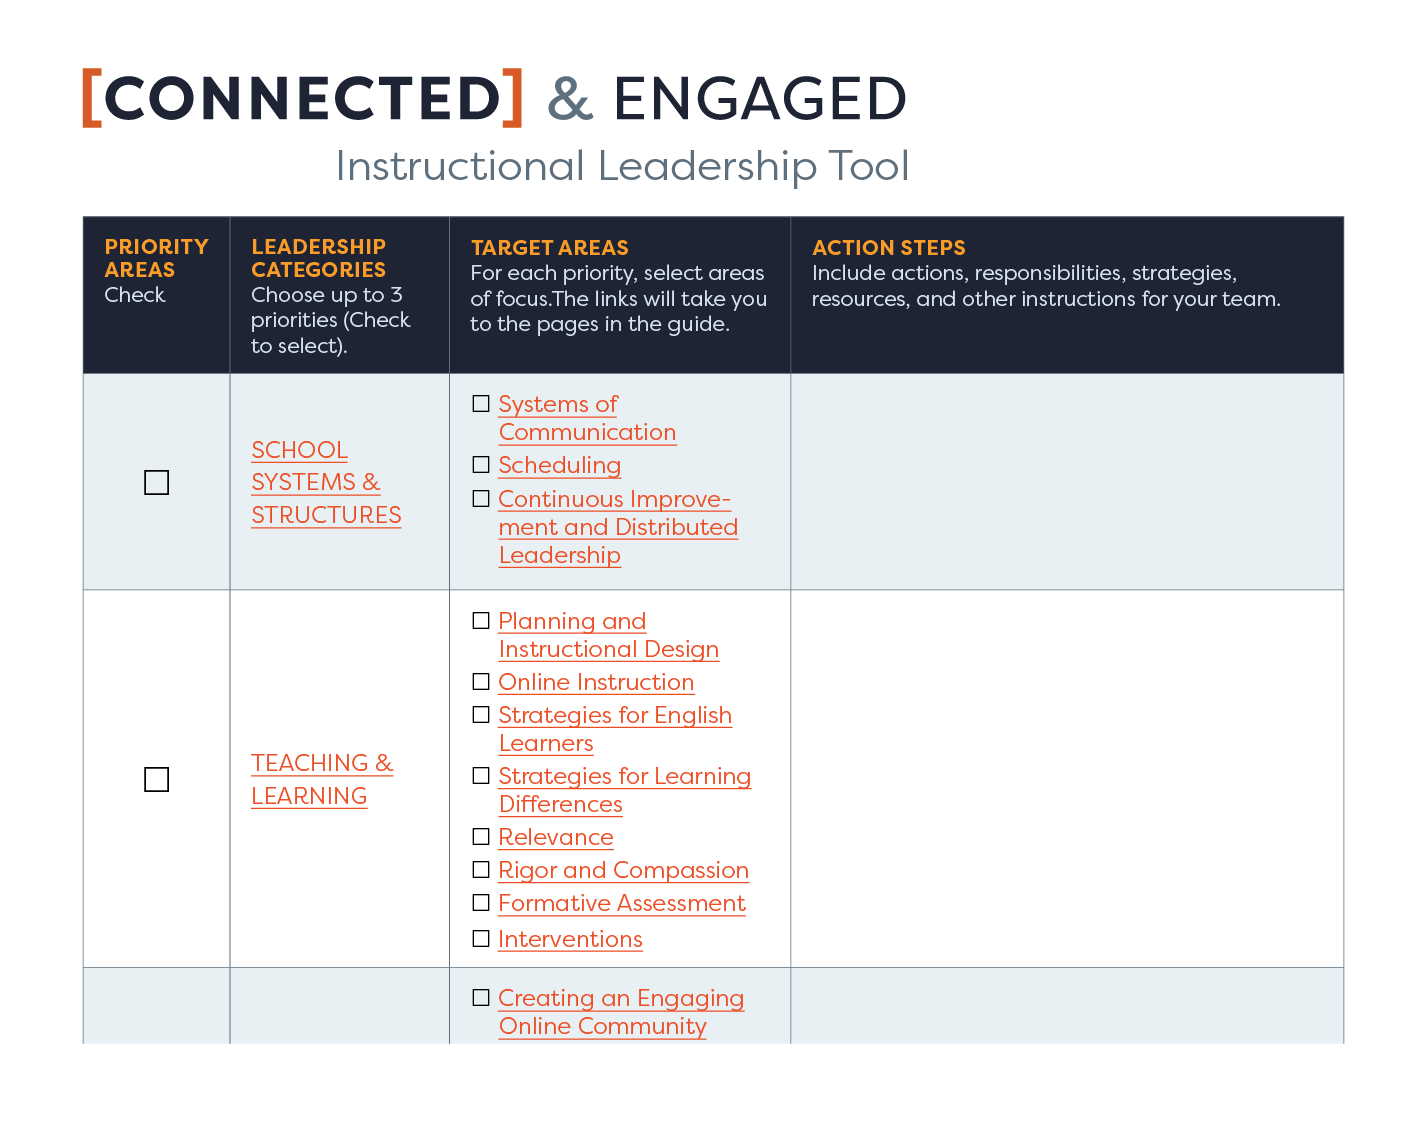 Connected & Engaged tool